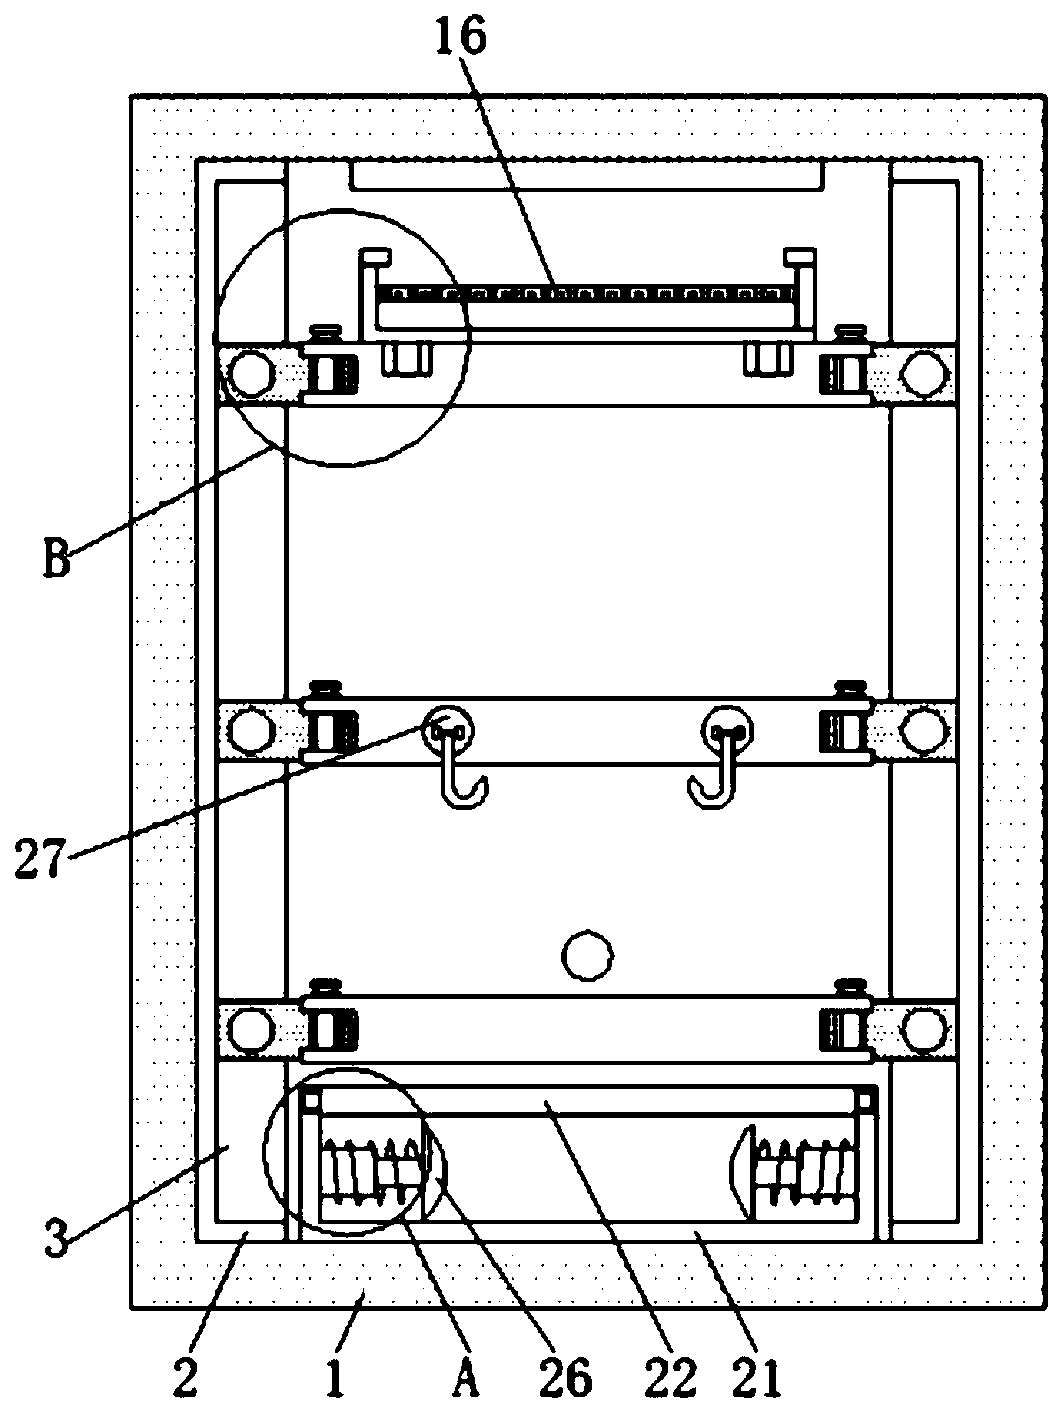 Refrigerator with adjustable internal space